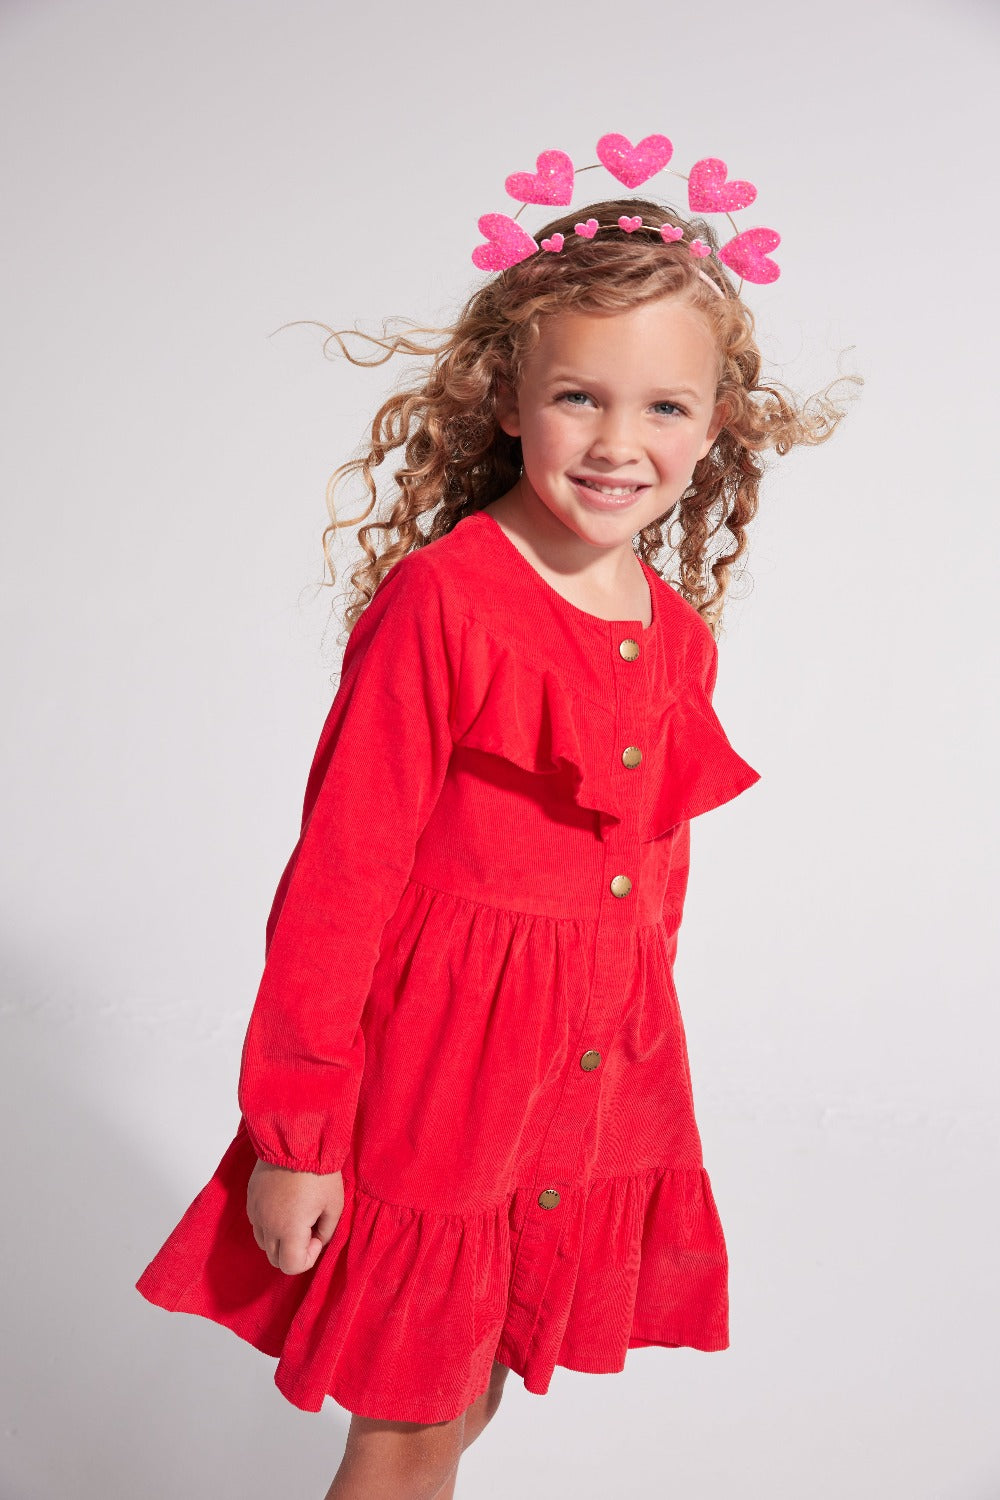 Red Cowgirl Dress - Shop on Pinterest